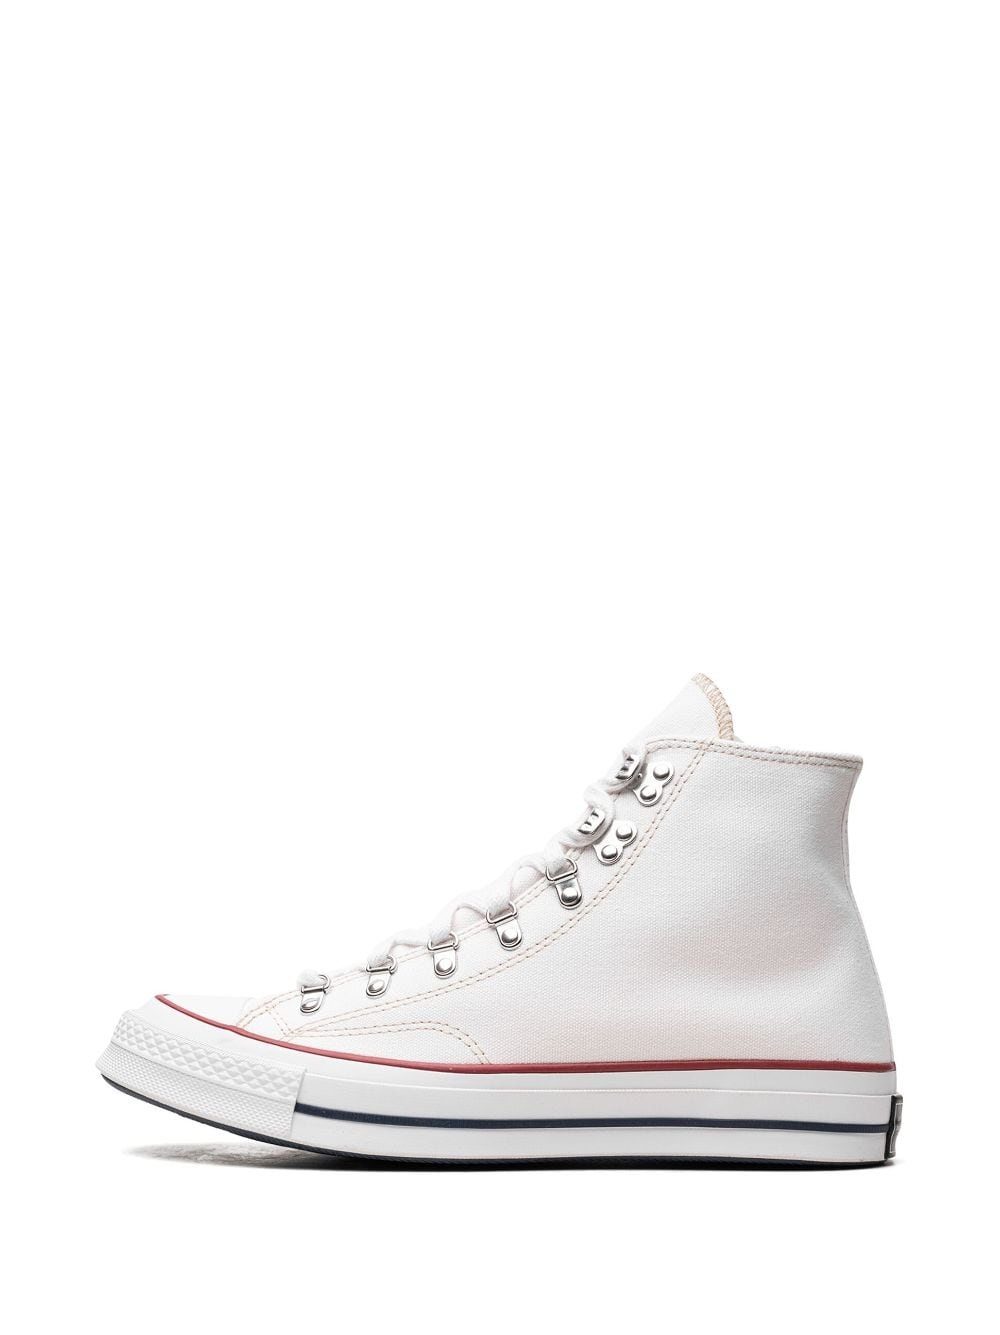 Chuck Taylor All-Star 70 Hi "pgLang White" sneakers - 5